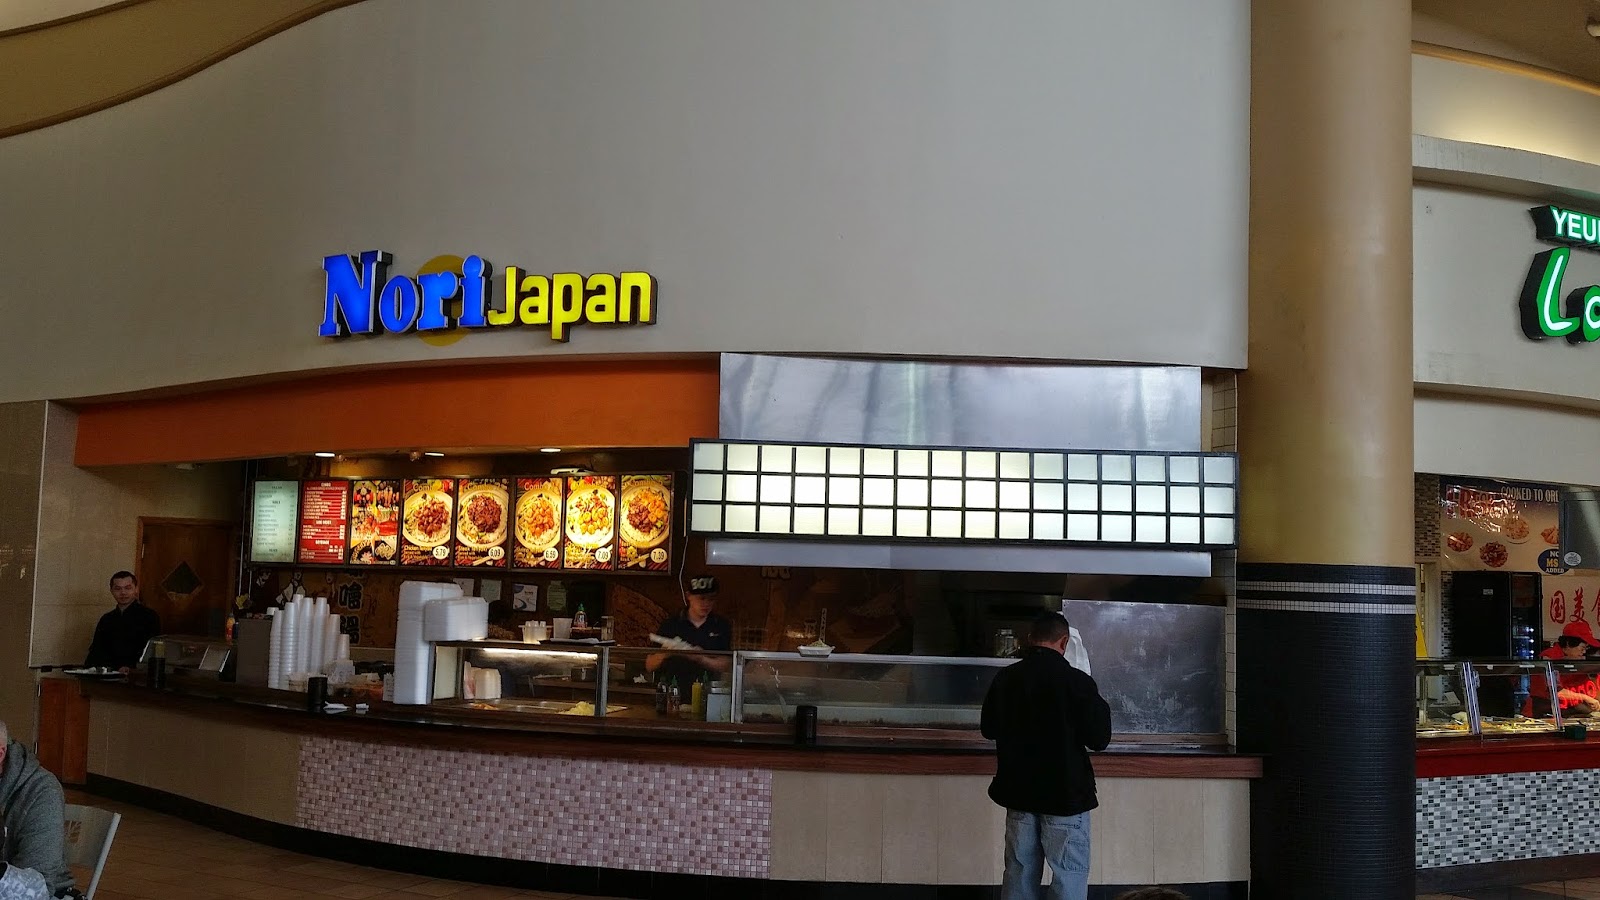 The Great List of Fast Food Reviews: Nori Japan